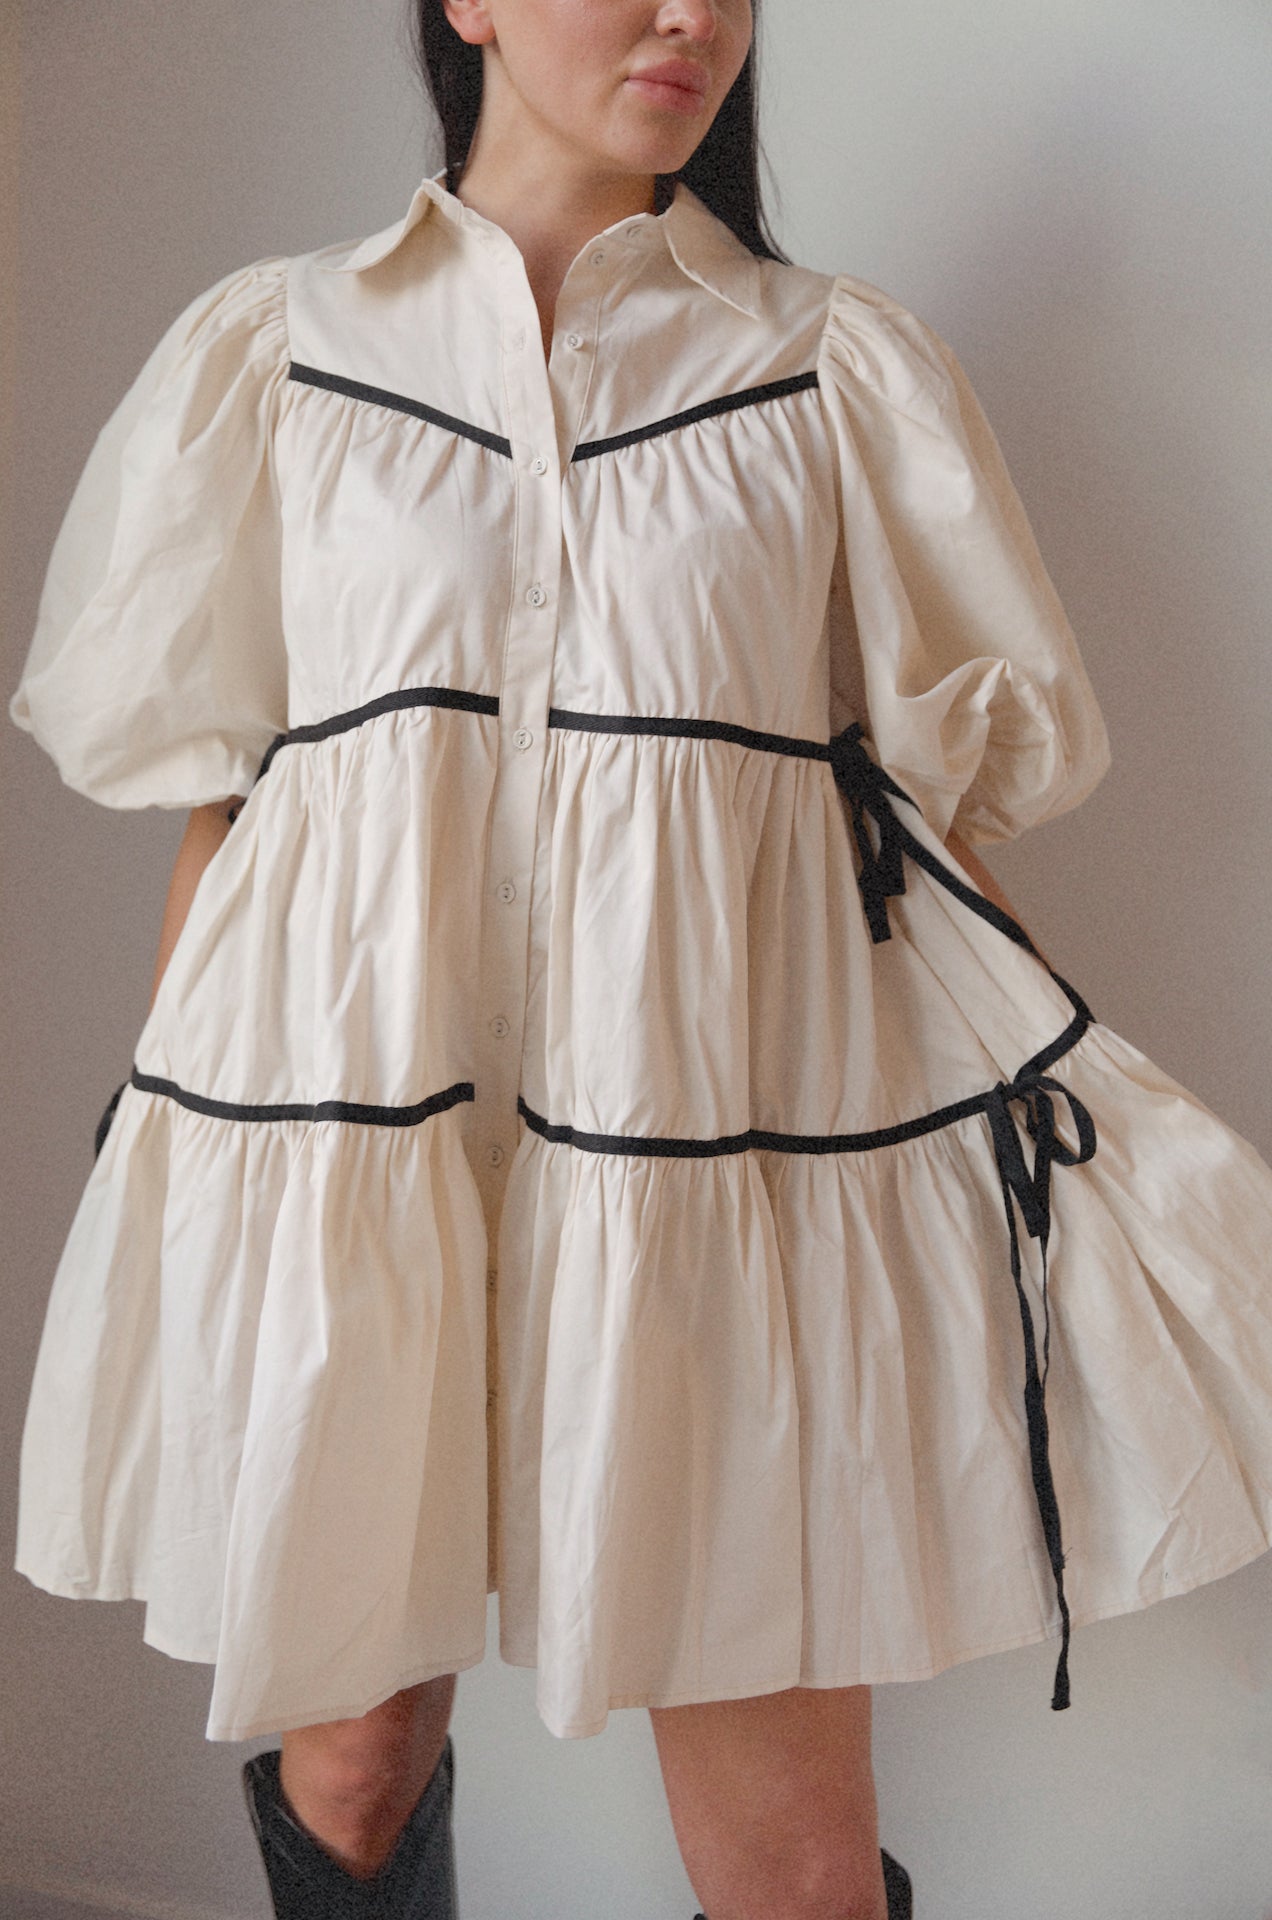 cream collared puff sleeve babydoll dress with side bow tie detail